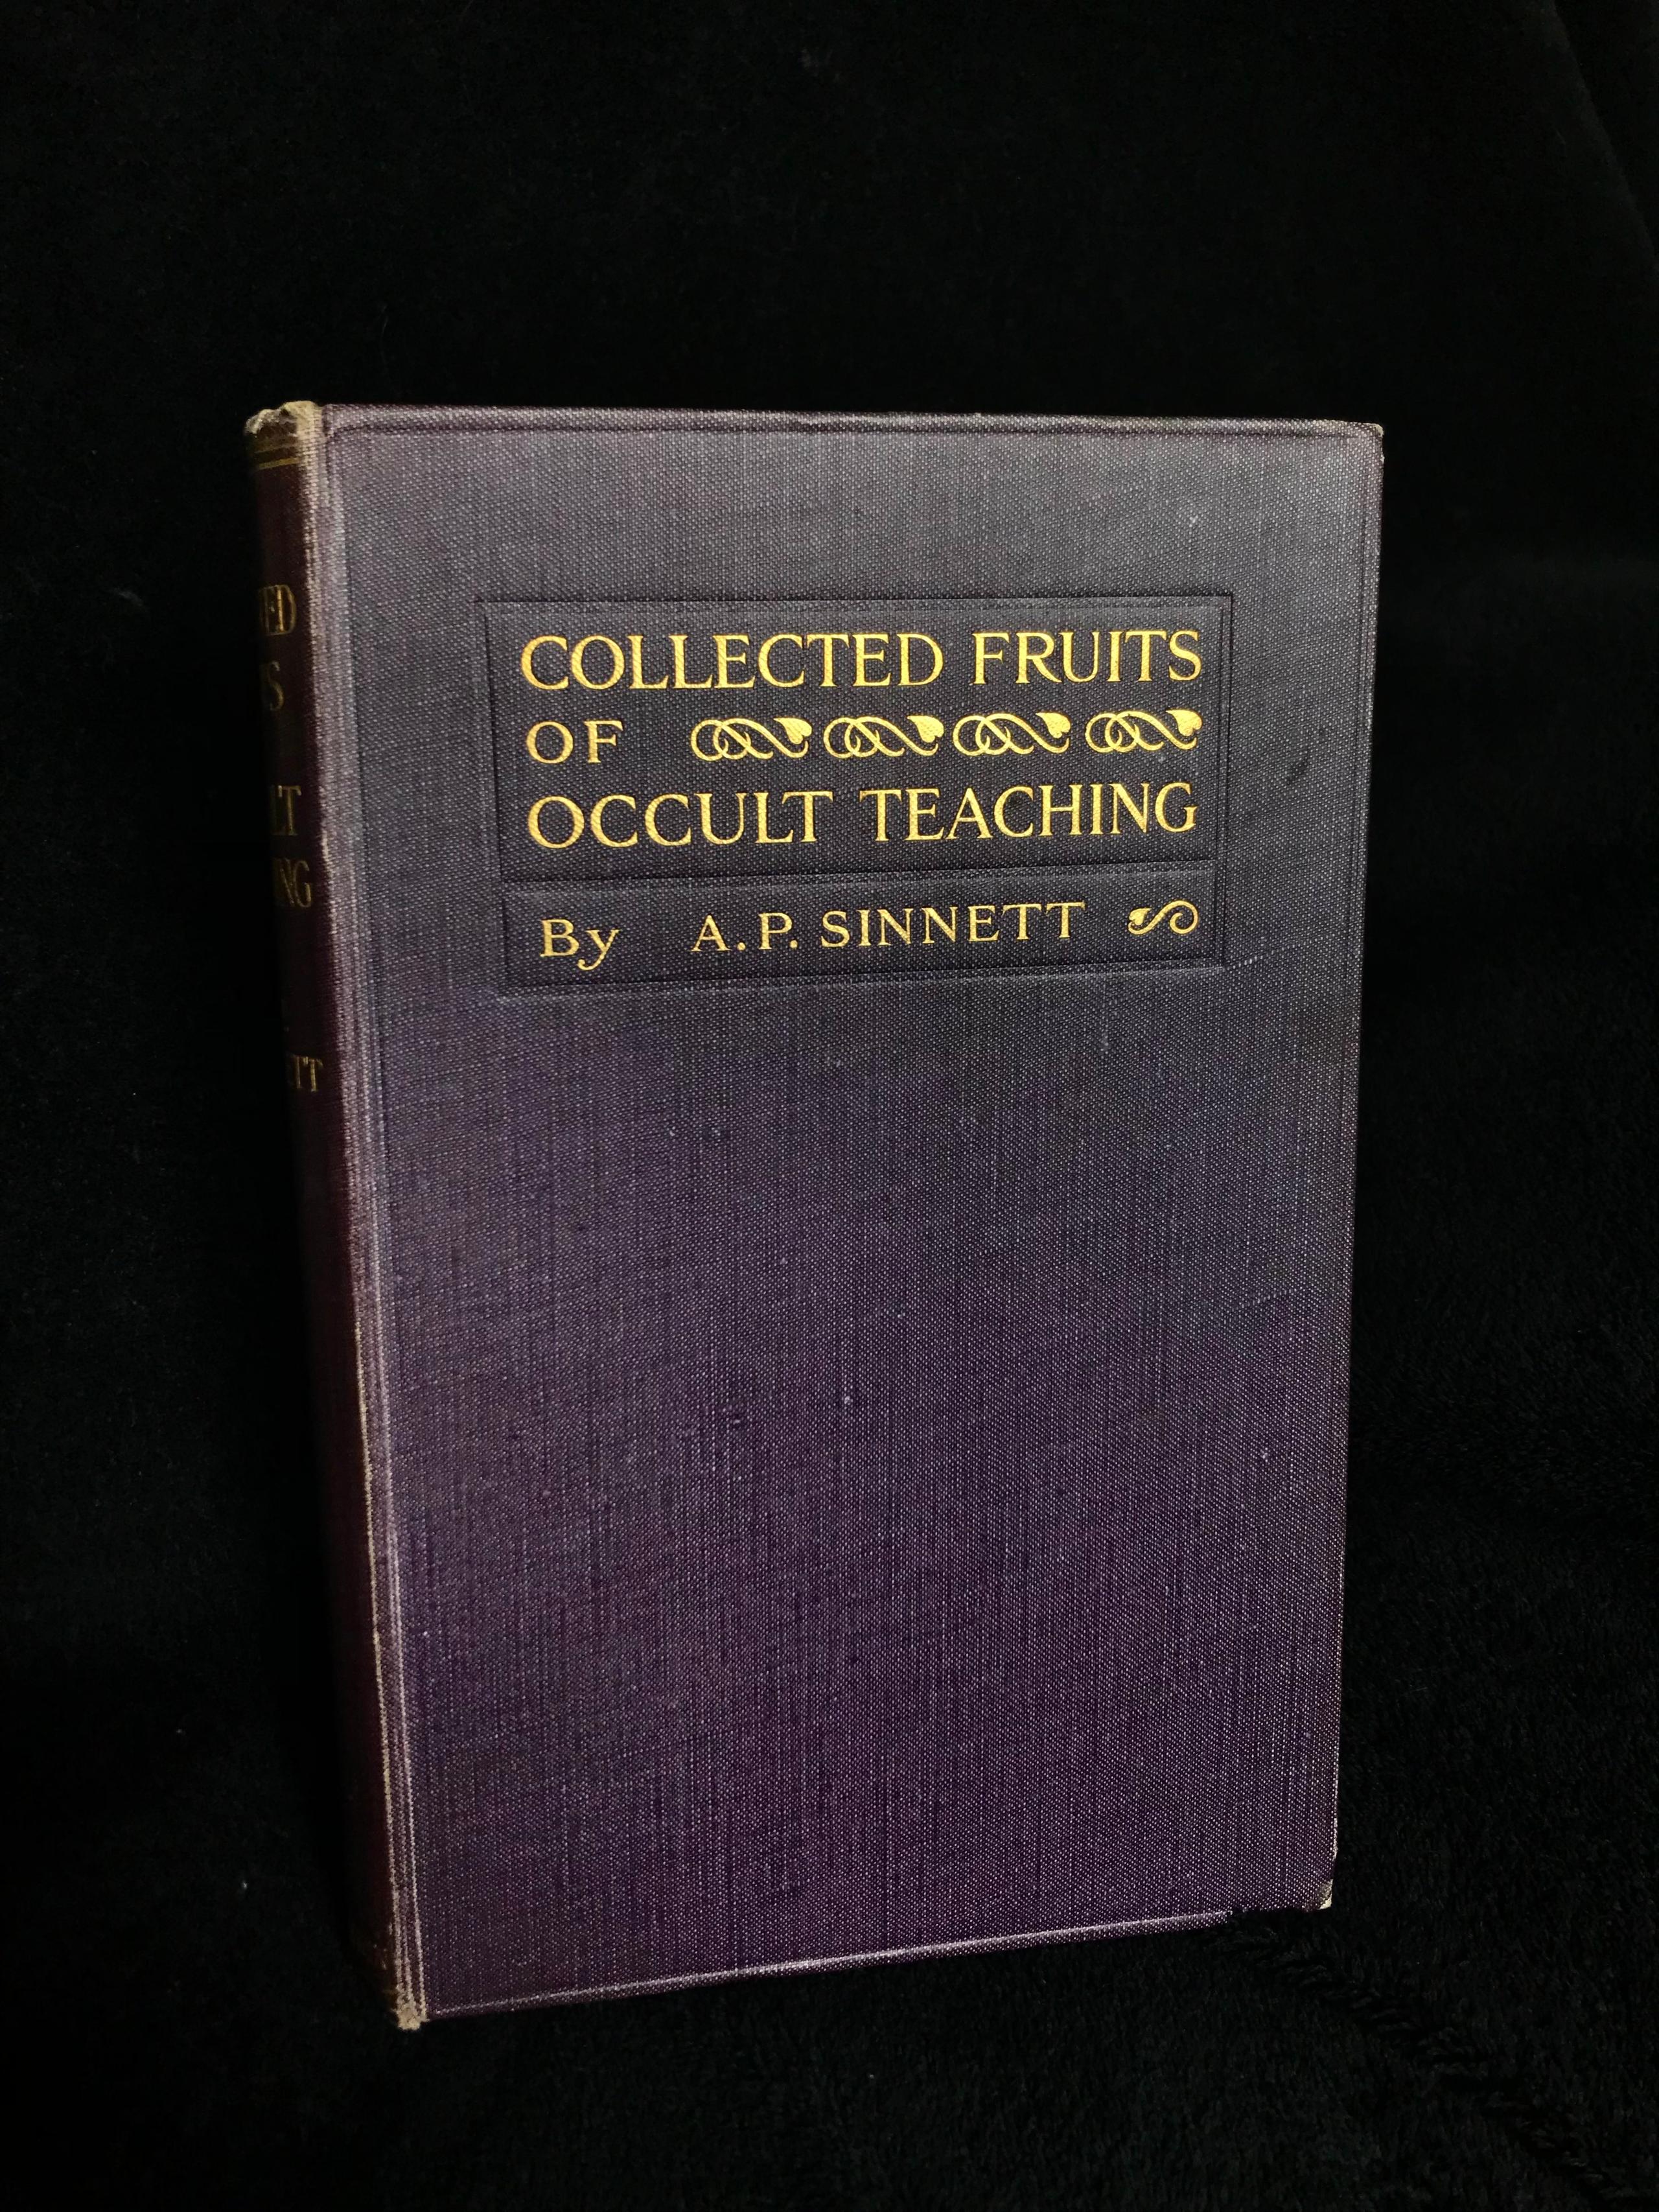 Collected Fruits Of Occult Teaching by A. P. Sinnett